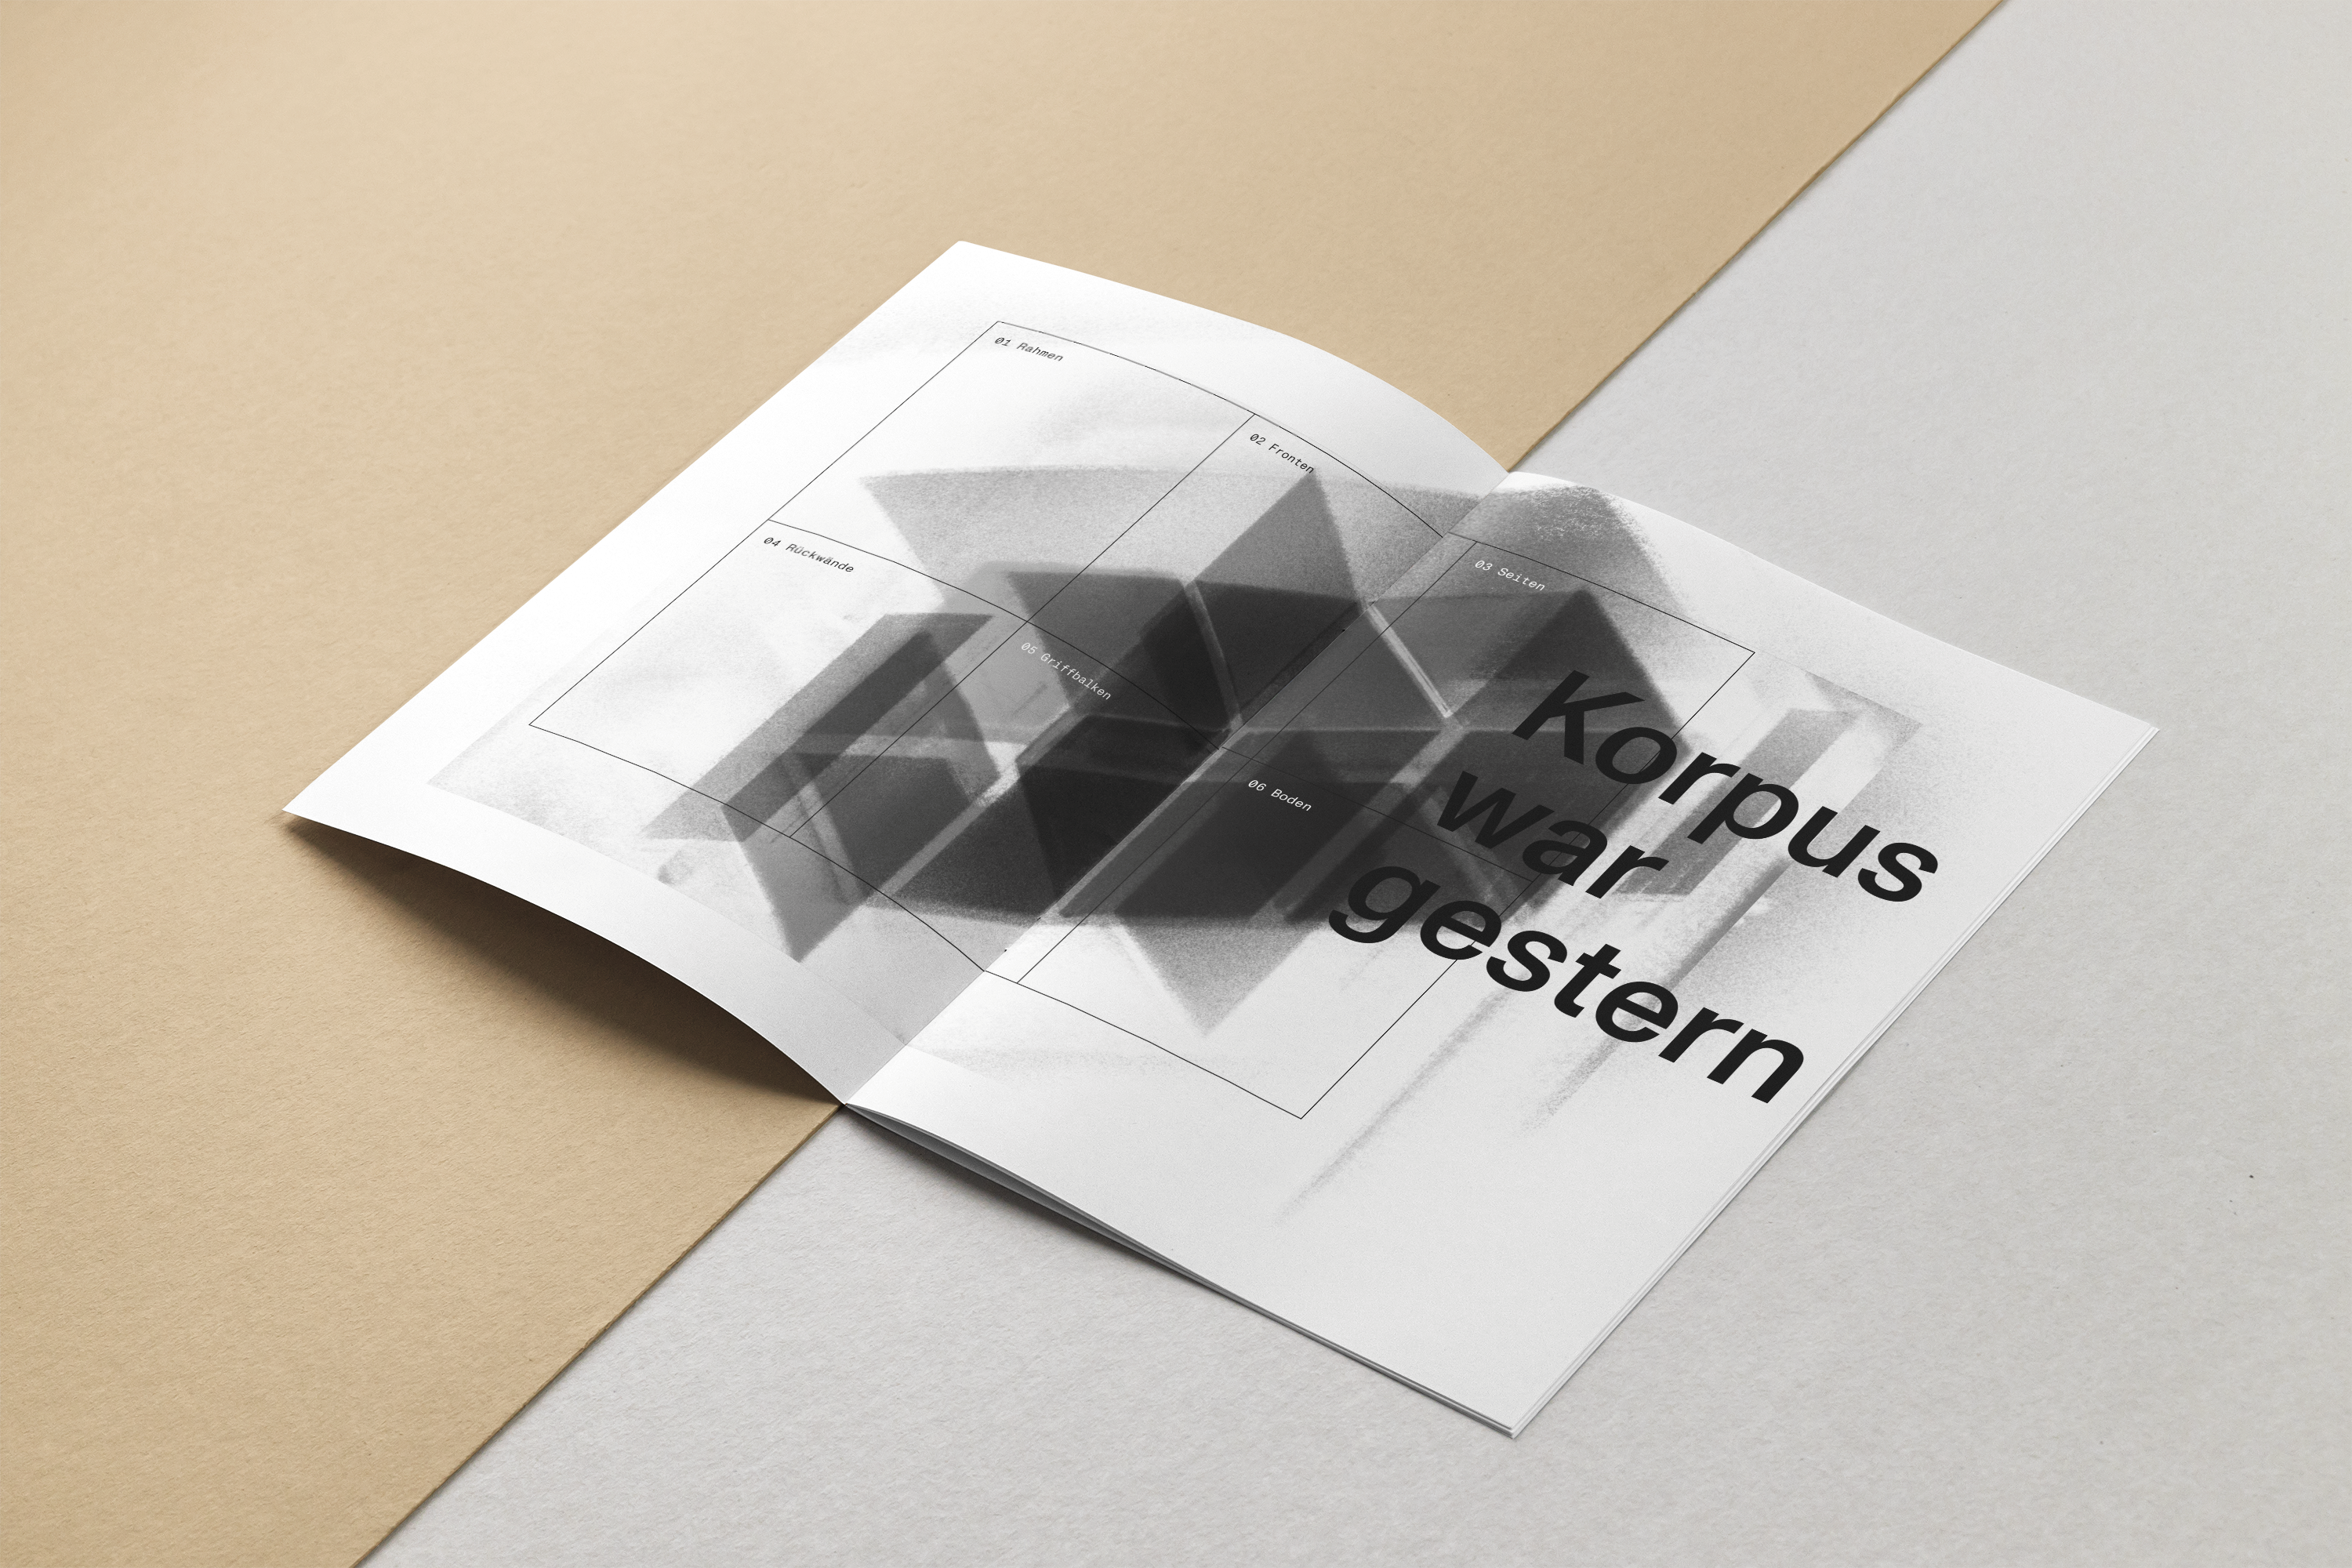 A design mockup of a brochure. It shows an open magazine with a double page black and white illustration of a explosion style deconstructed j*gast kitchen and the headline: Korpus war gestern.